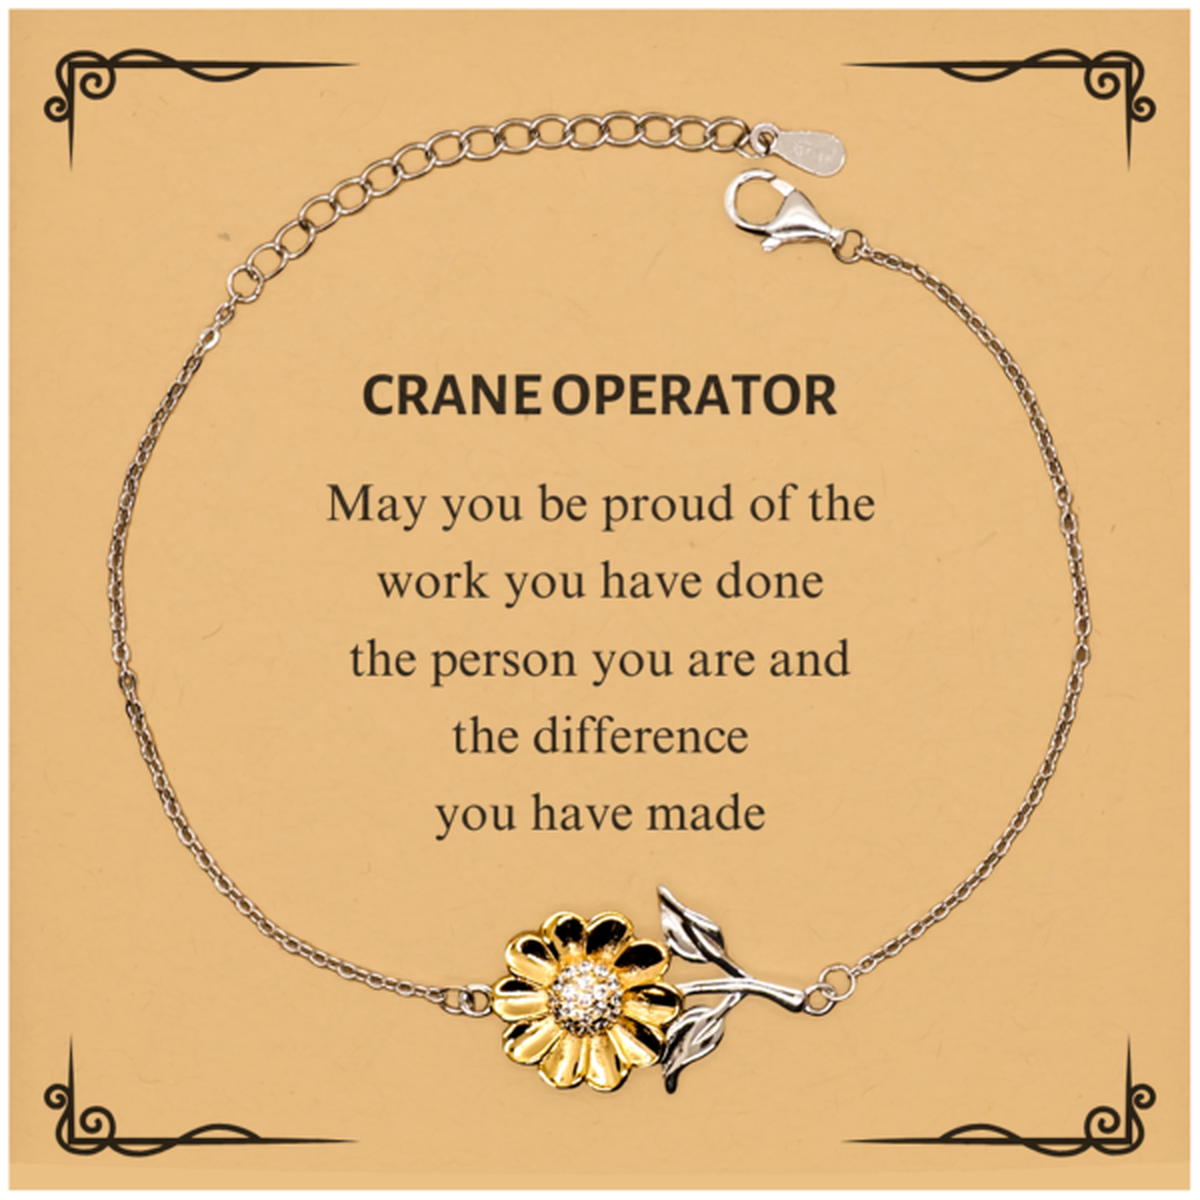 Crane Operator May you be proud of the work you have done, Retirement Crane Operator Sunflower Bracelet for Colleague Appreciation Gifts Amazing for Crane Operator